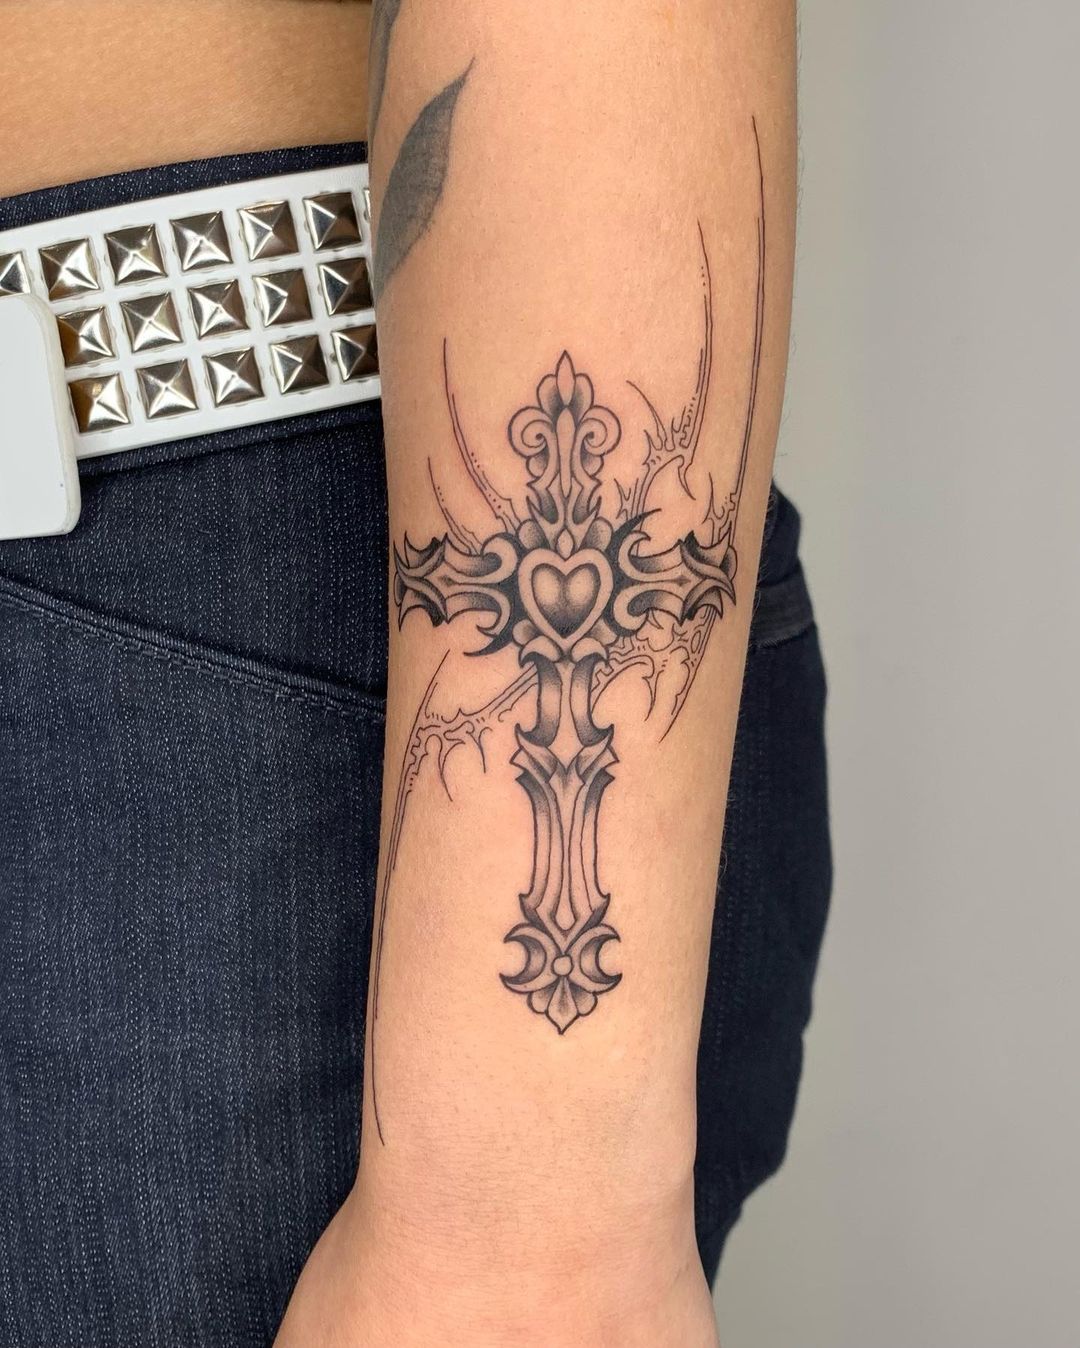 Tribal Cross Tattoo With Wings Design On Forearm For Men